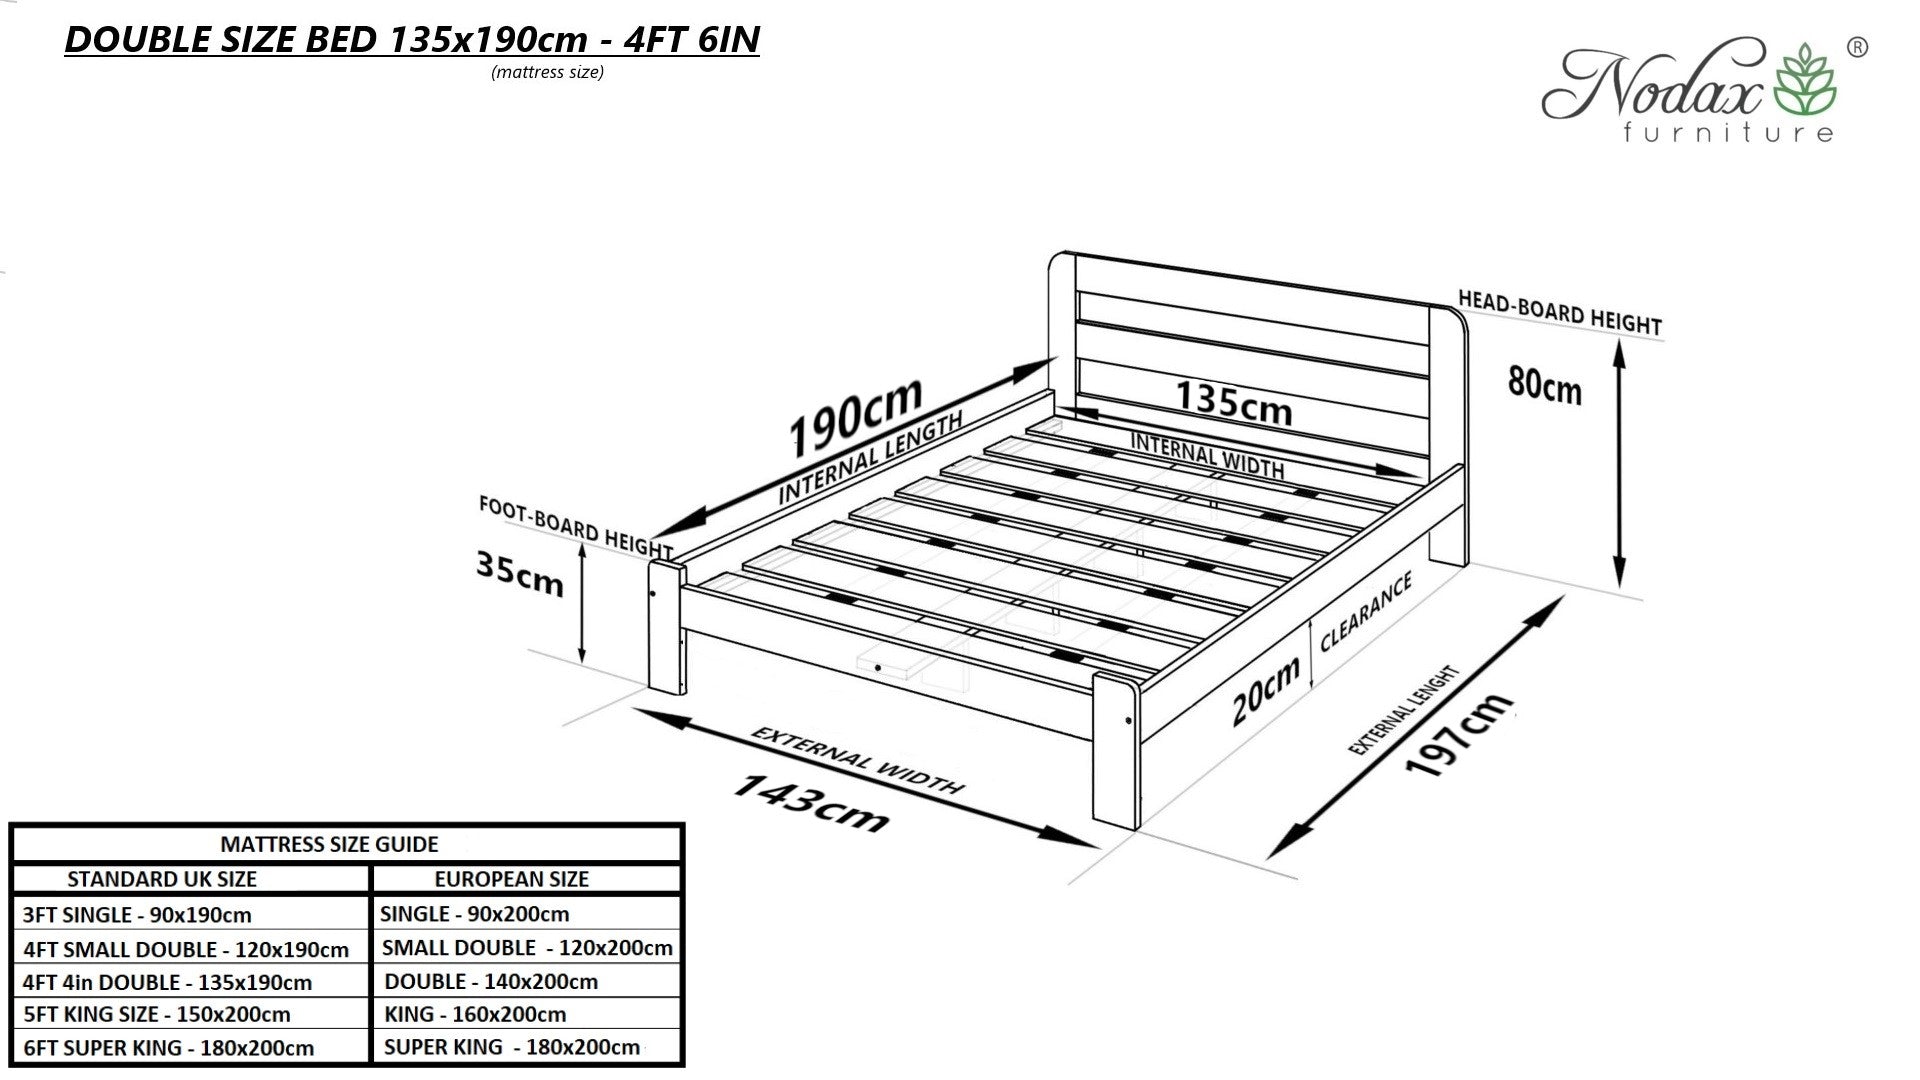 Wooden-bed-online-dimensions-4ft6in